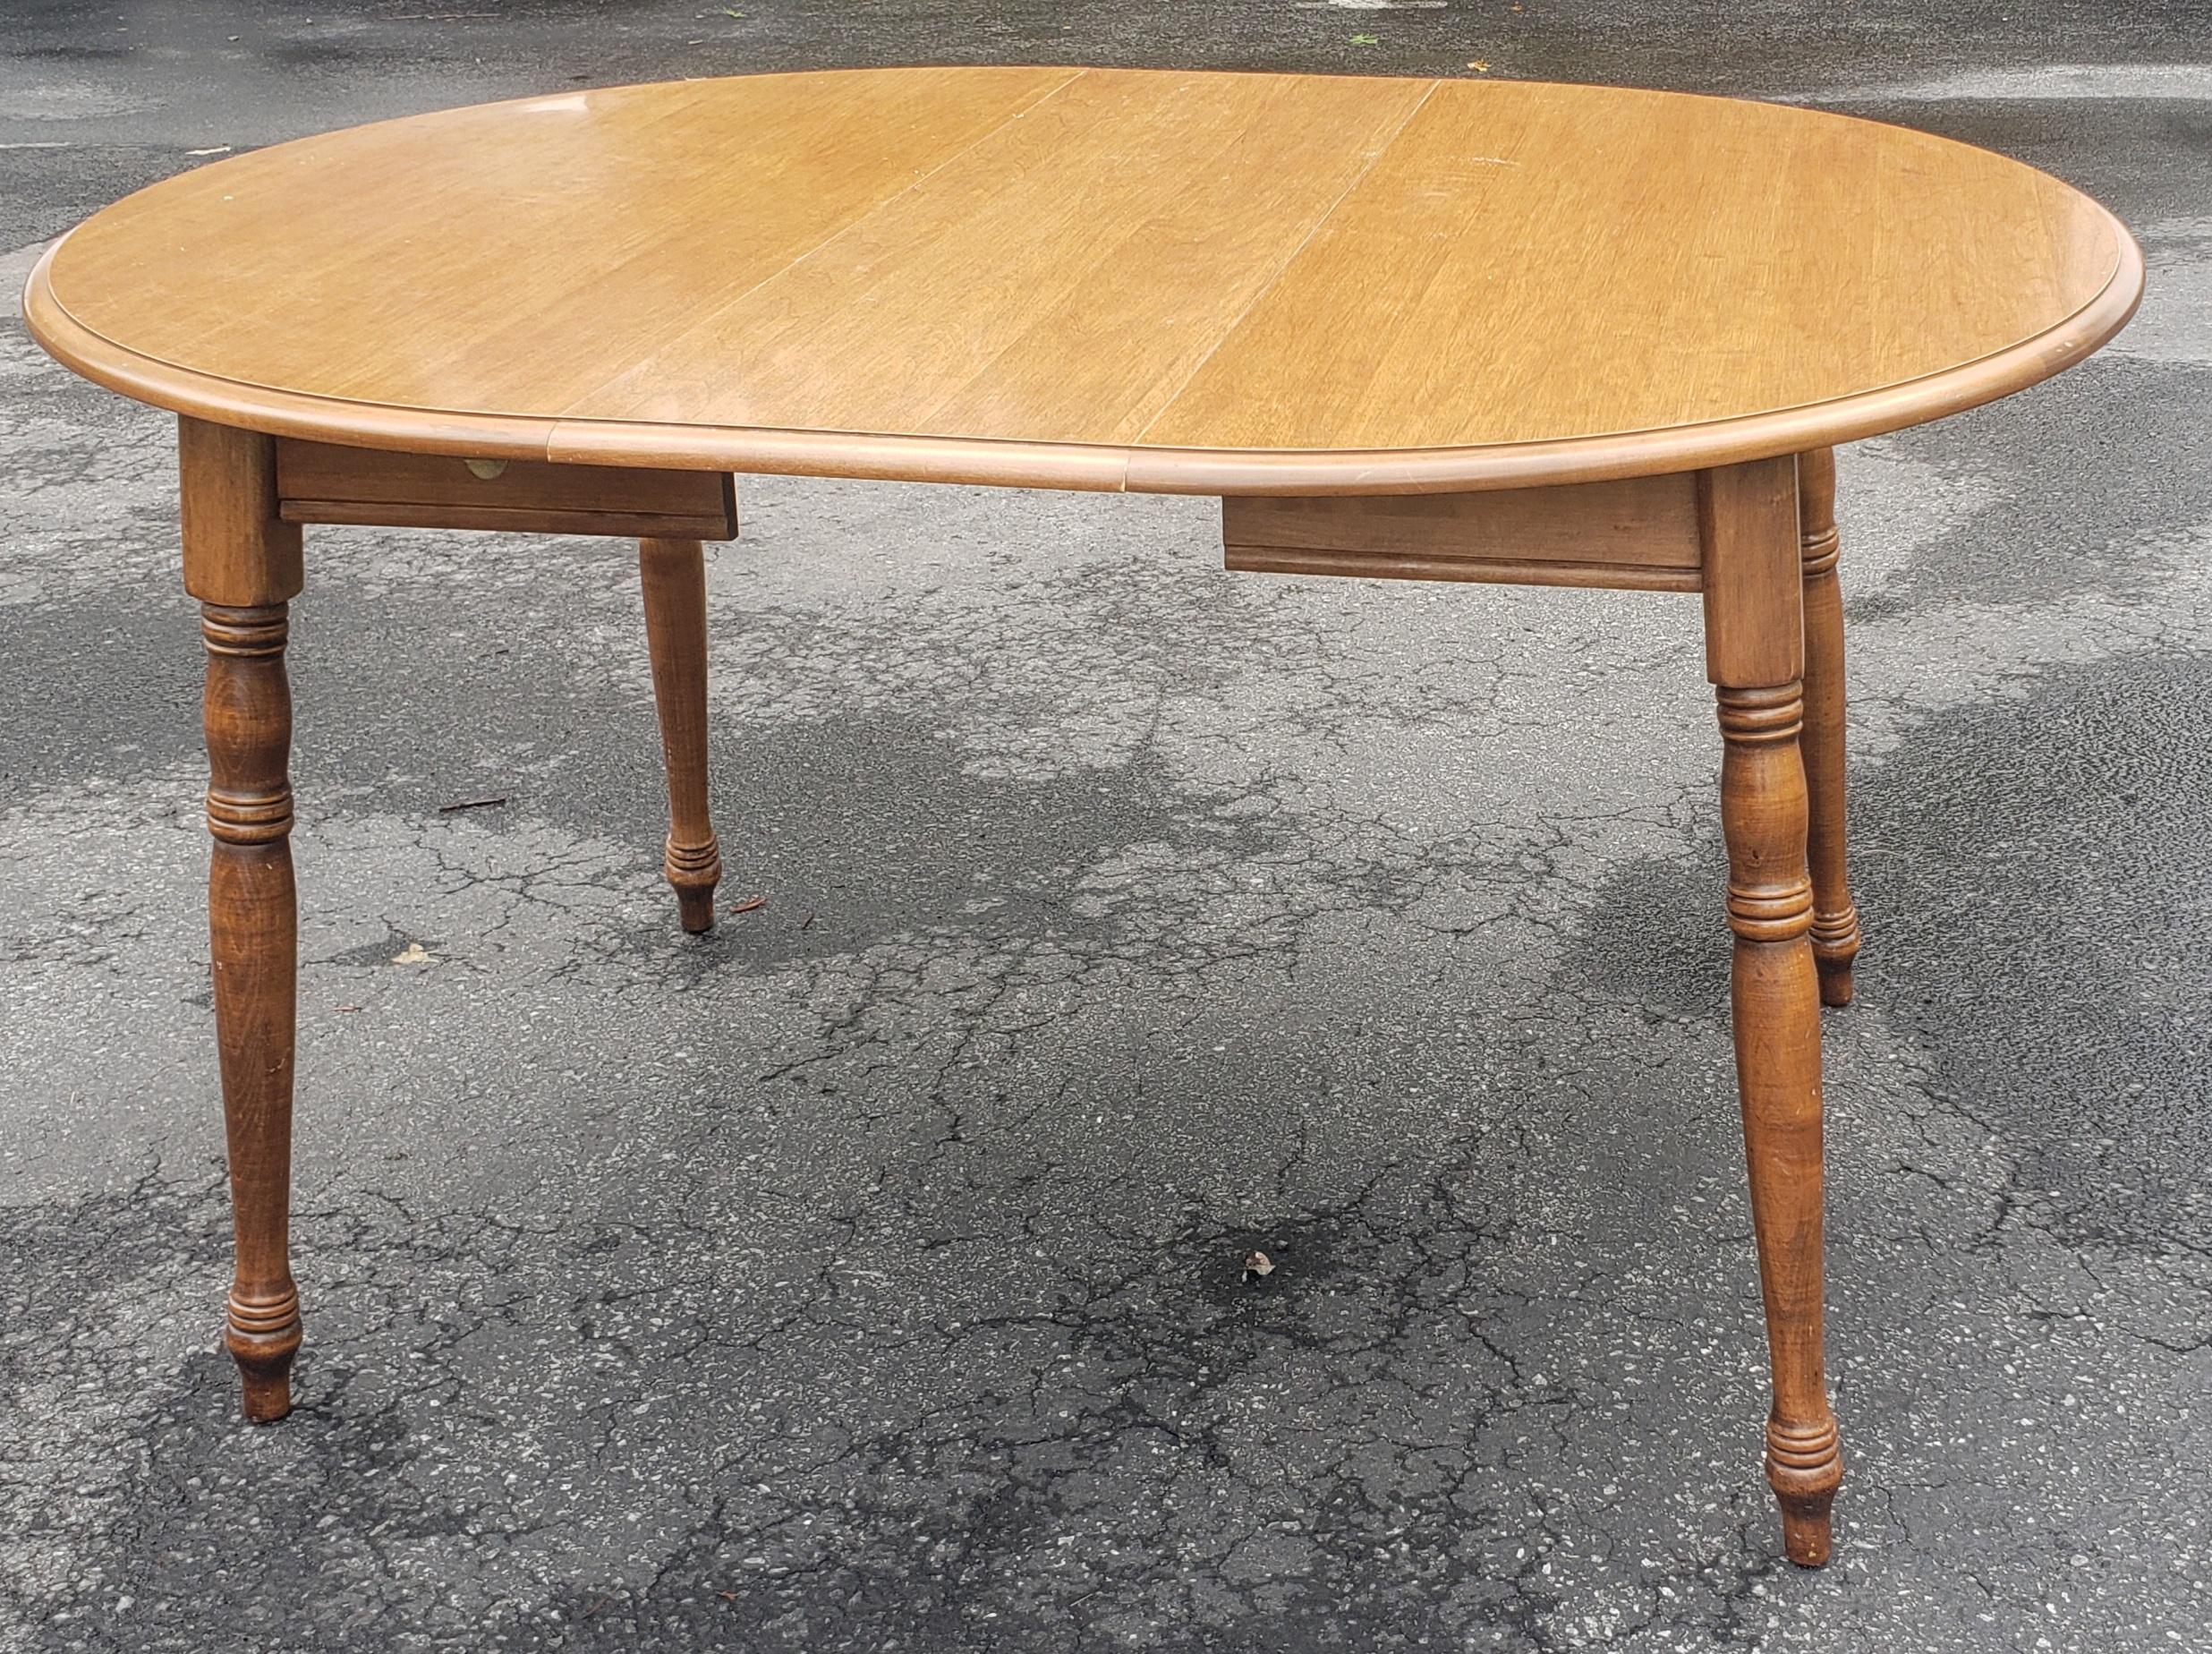 A mid Century Early American Style Maple Small Dining table or Kitchen Table with one extension leaf. Measures 53